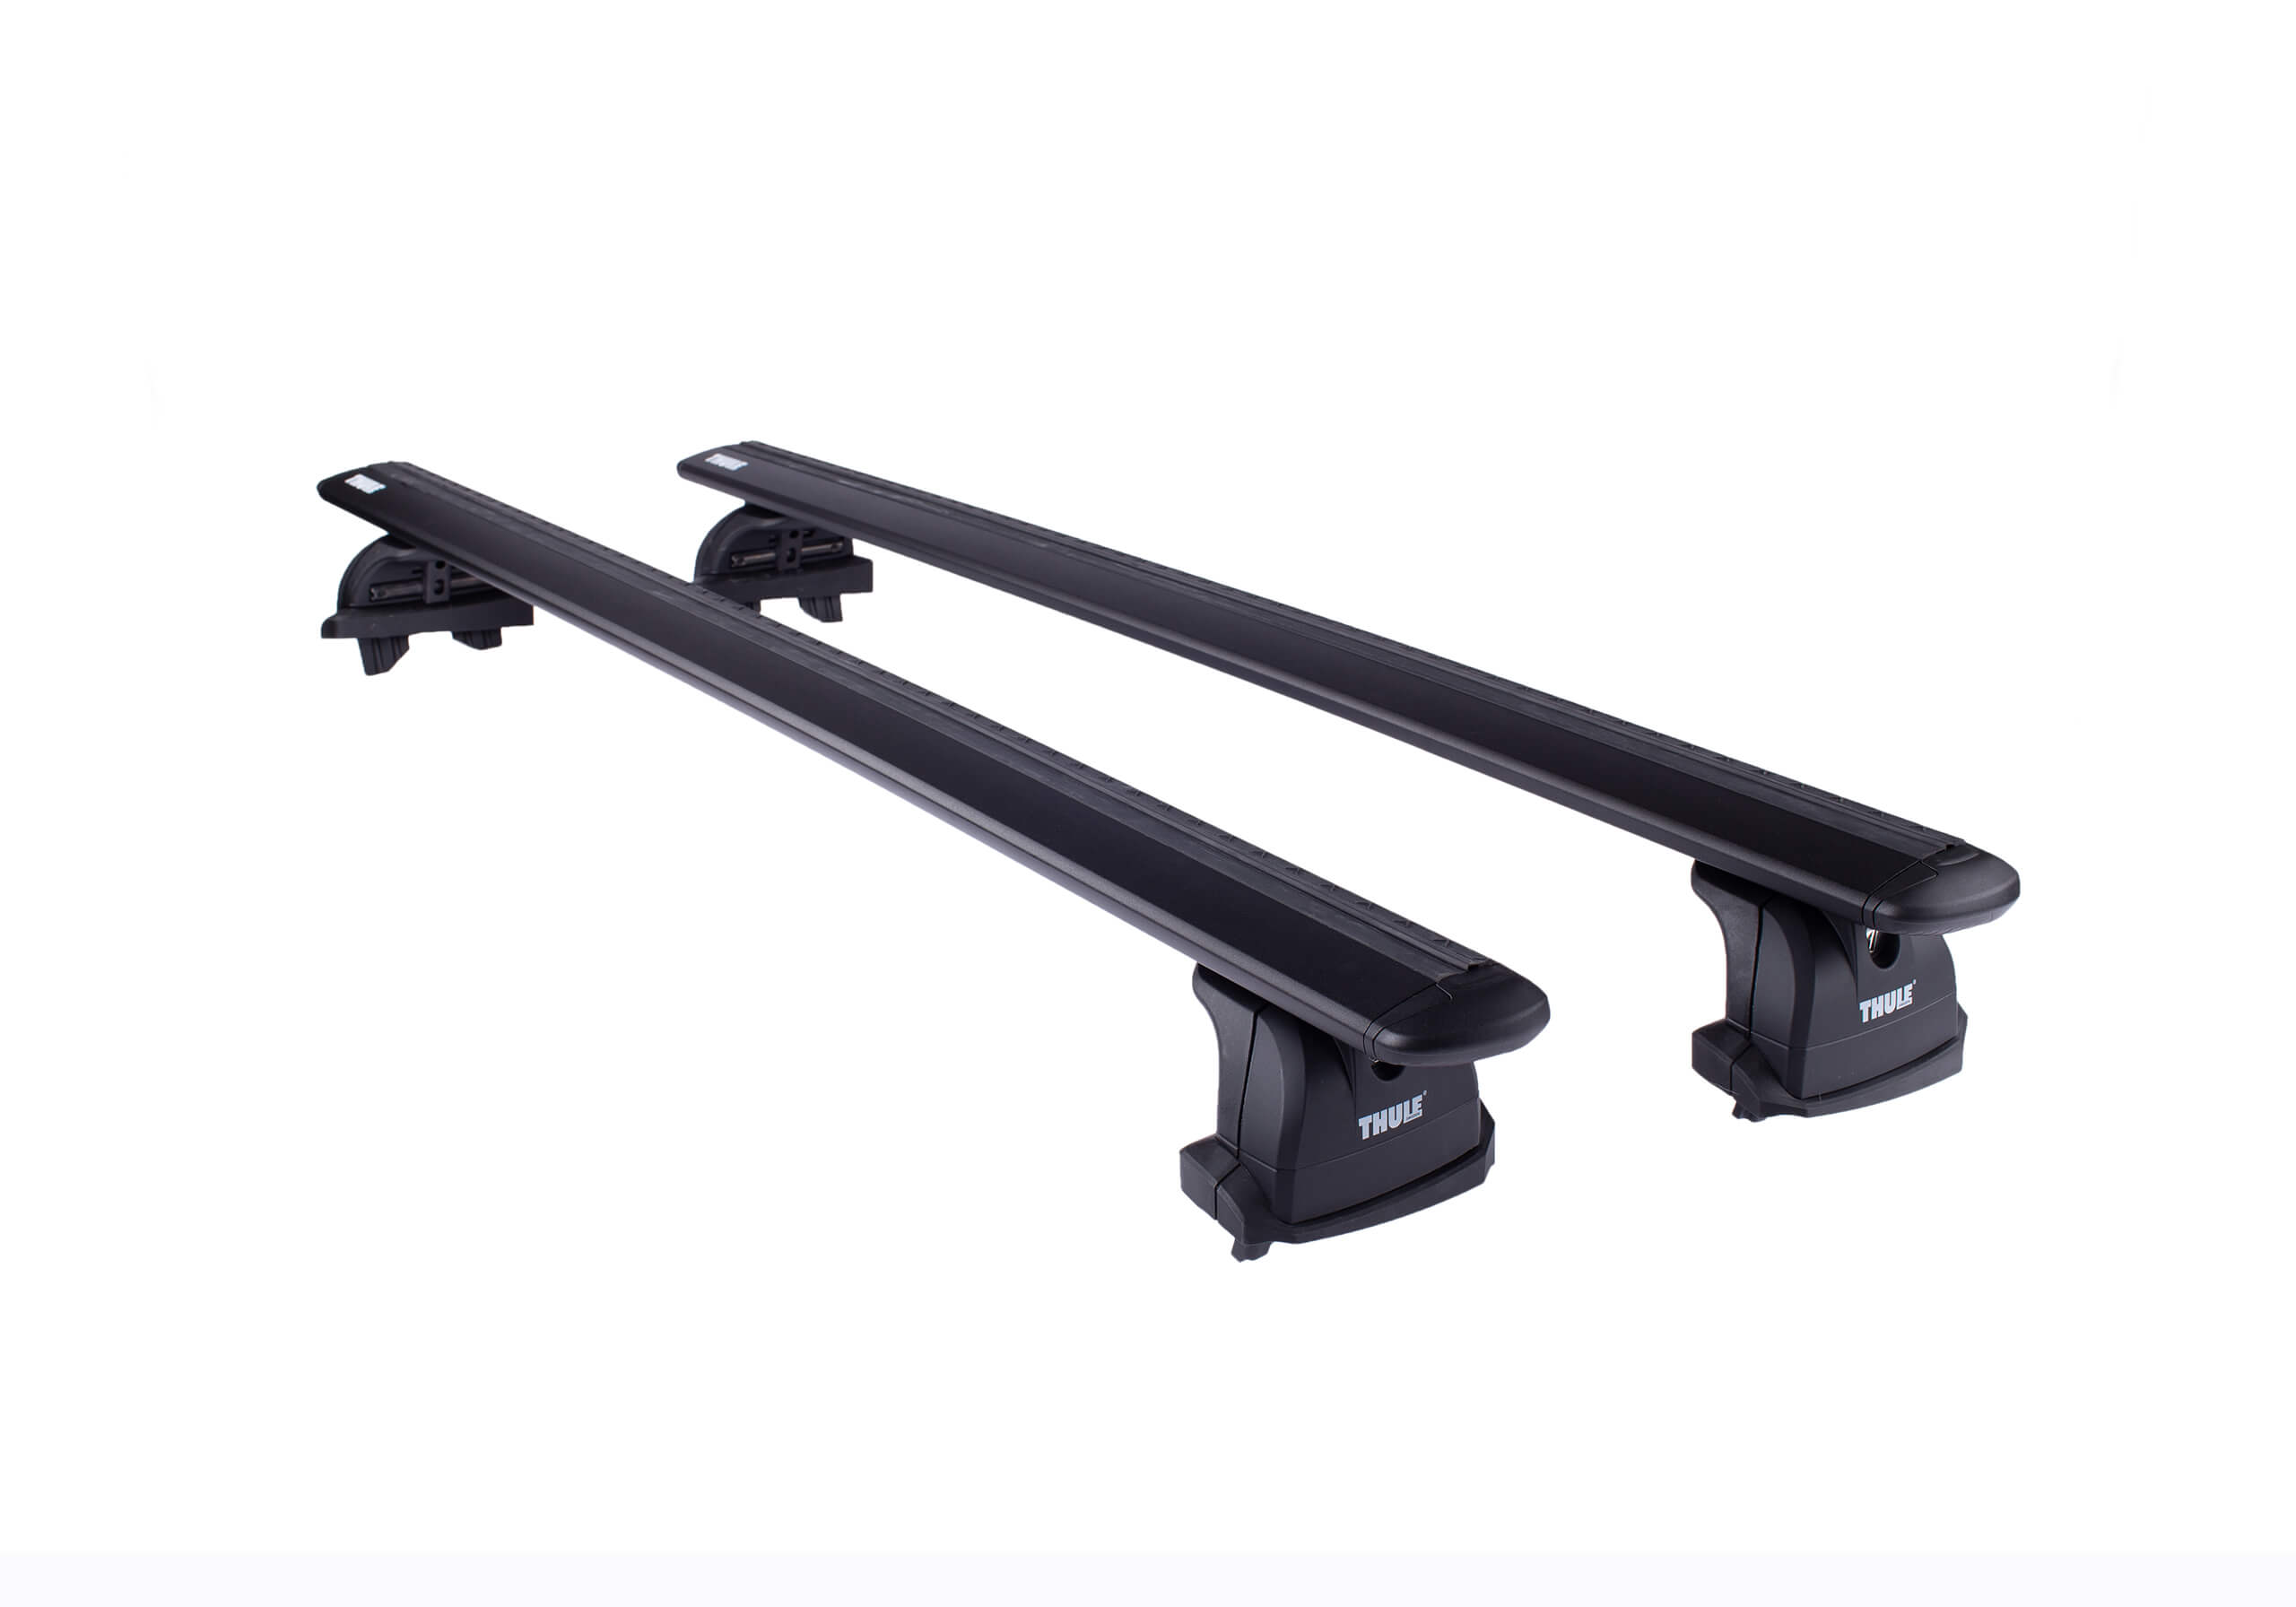 BMW 3 series Touring (2002 to 2005):Thule black WingBars package - 753, 7111B, 3065